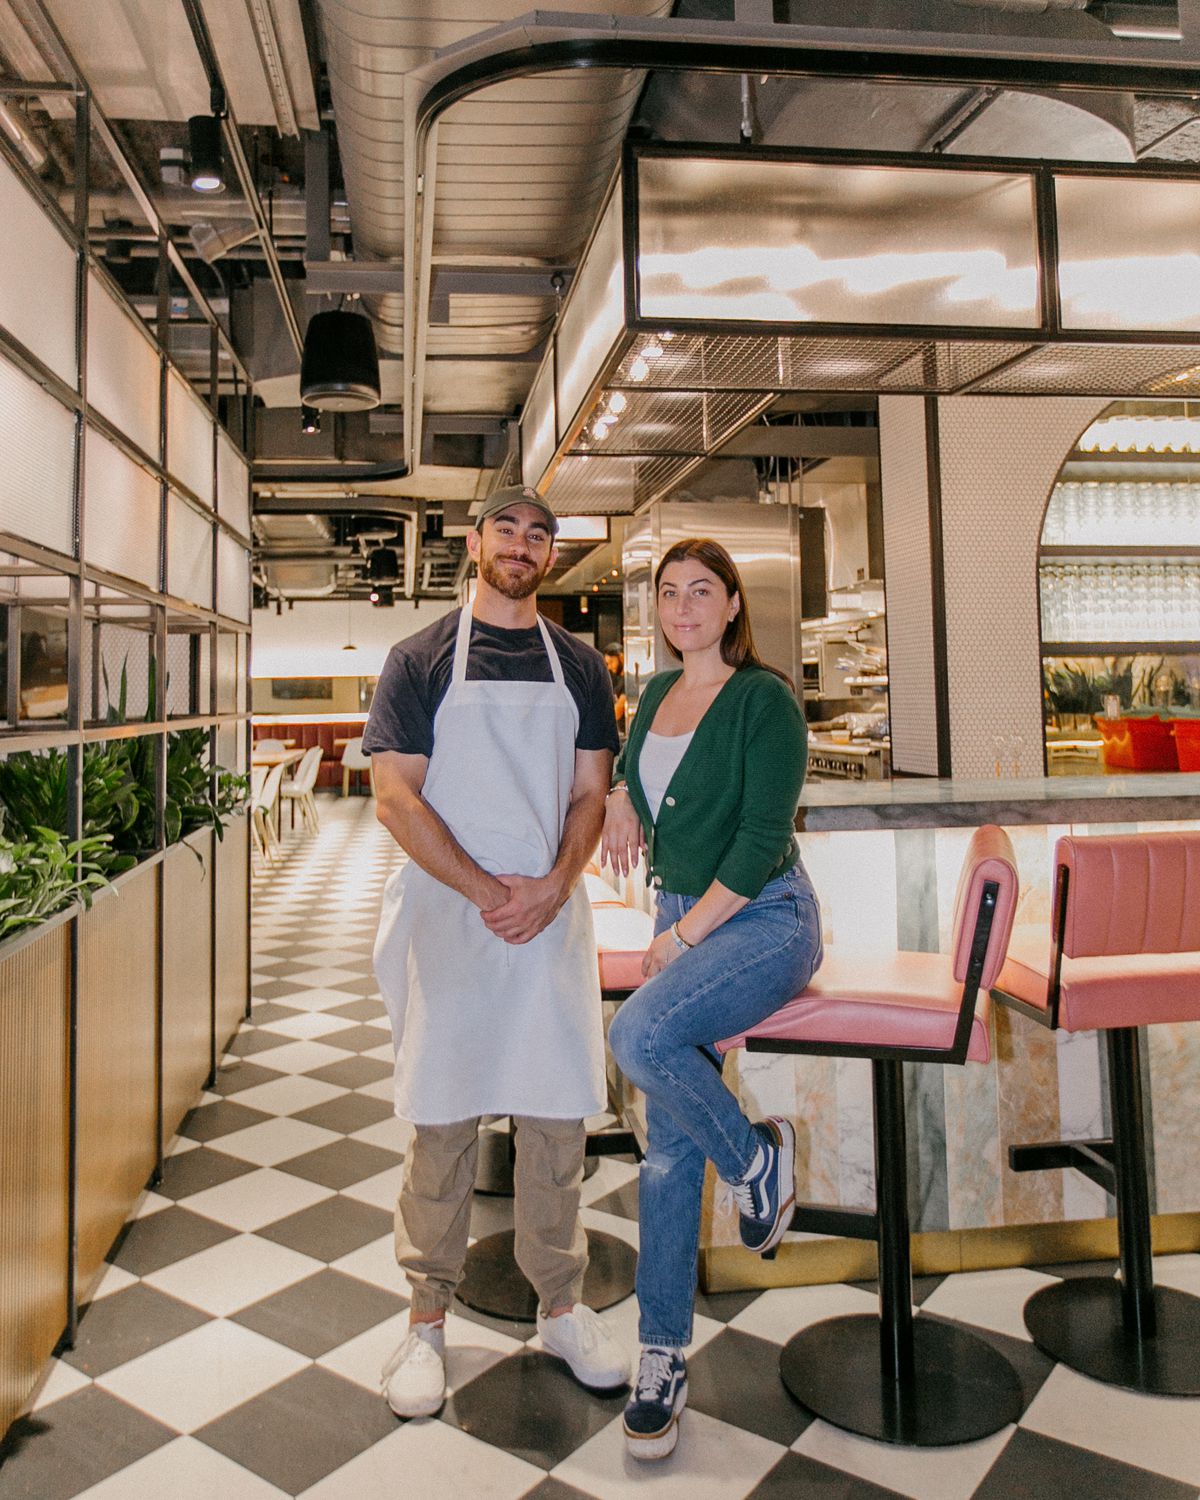 man and woman standing inside restaurant with clack and white checkered floors